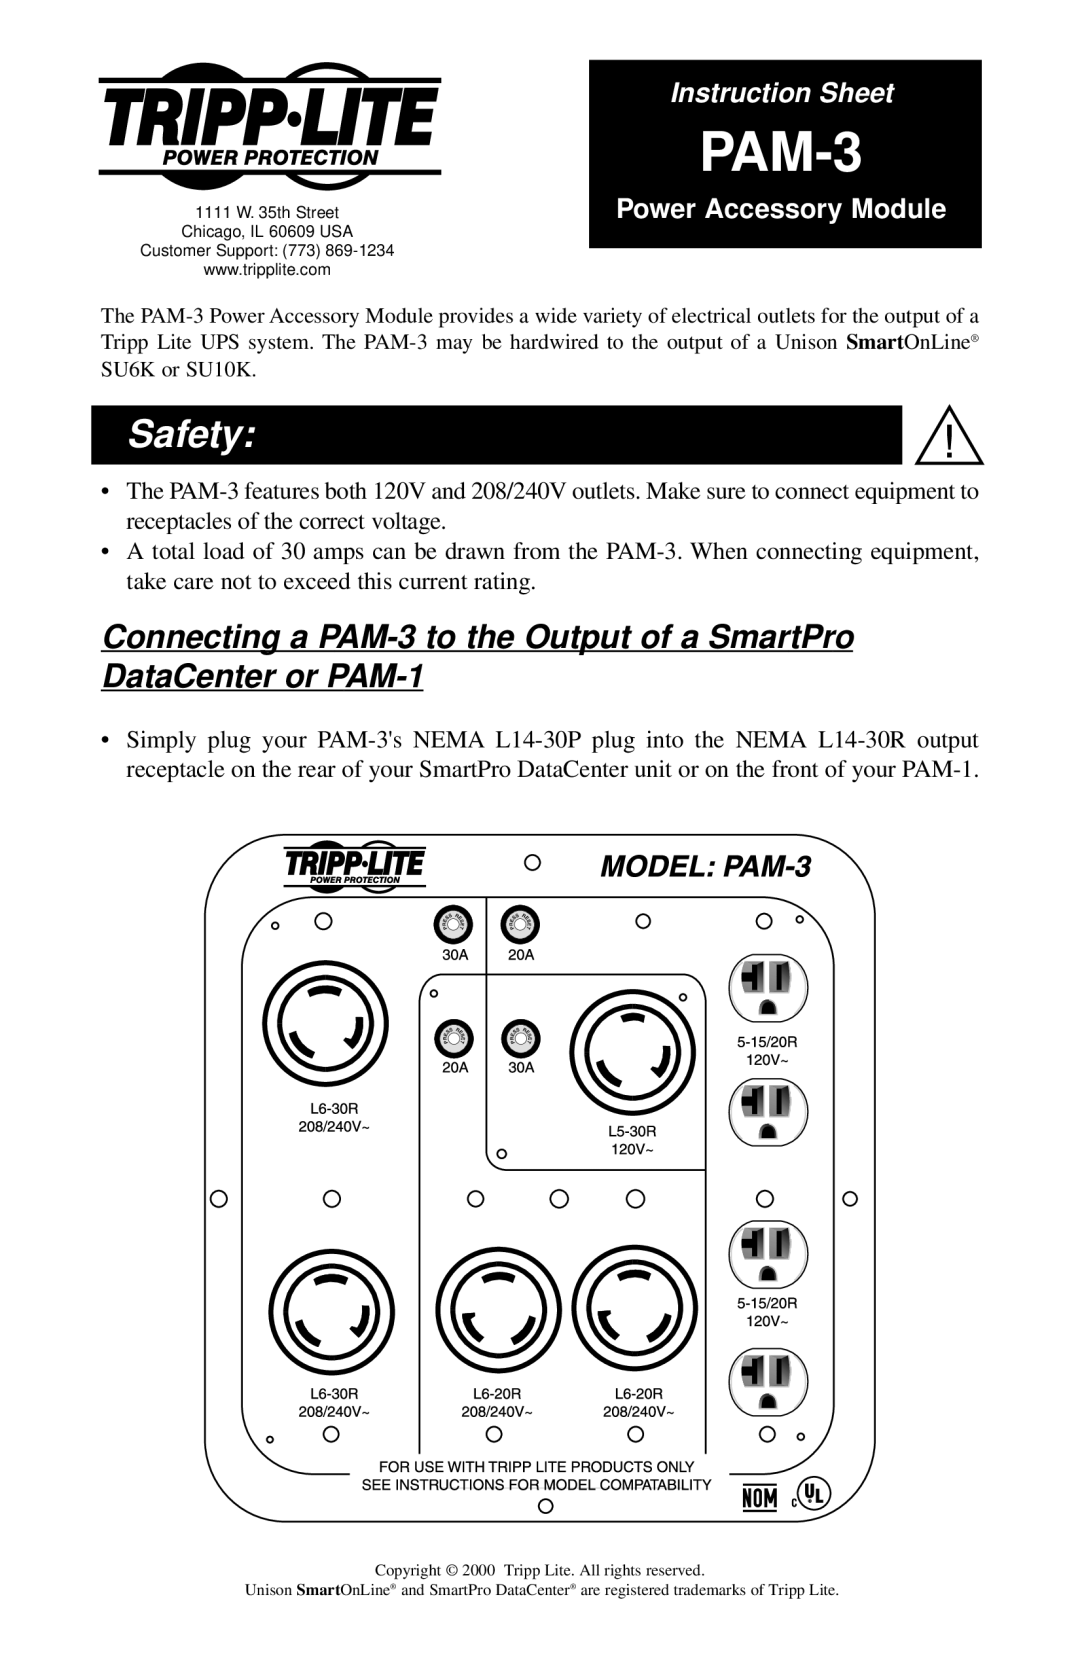 Tripp Lite instruction sheet Connecting a PAM-3 to the Output of a SmartPro DataCenter or PAM-1, Safety 